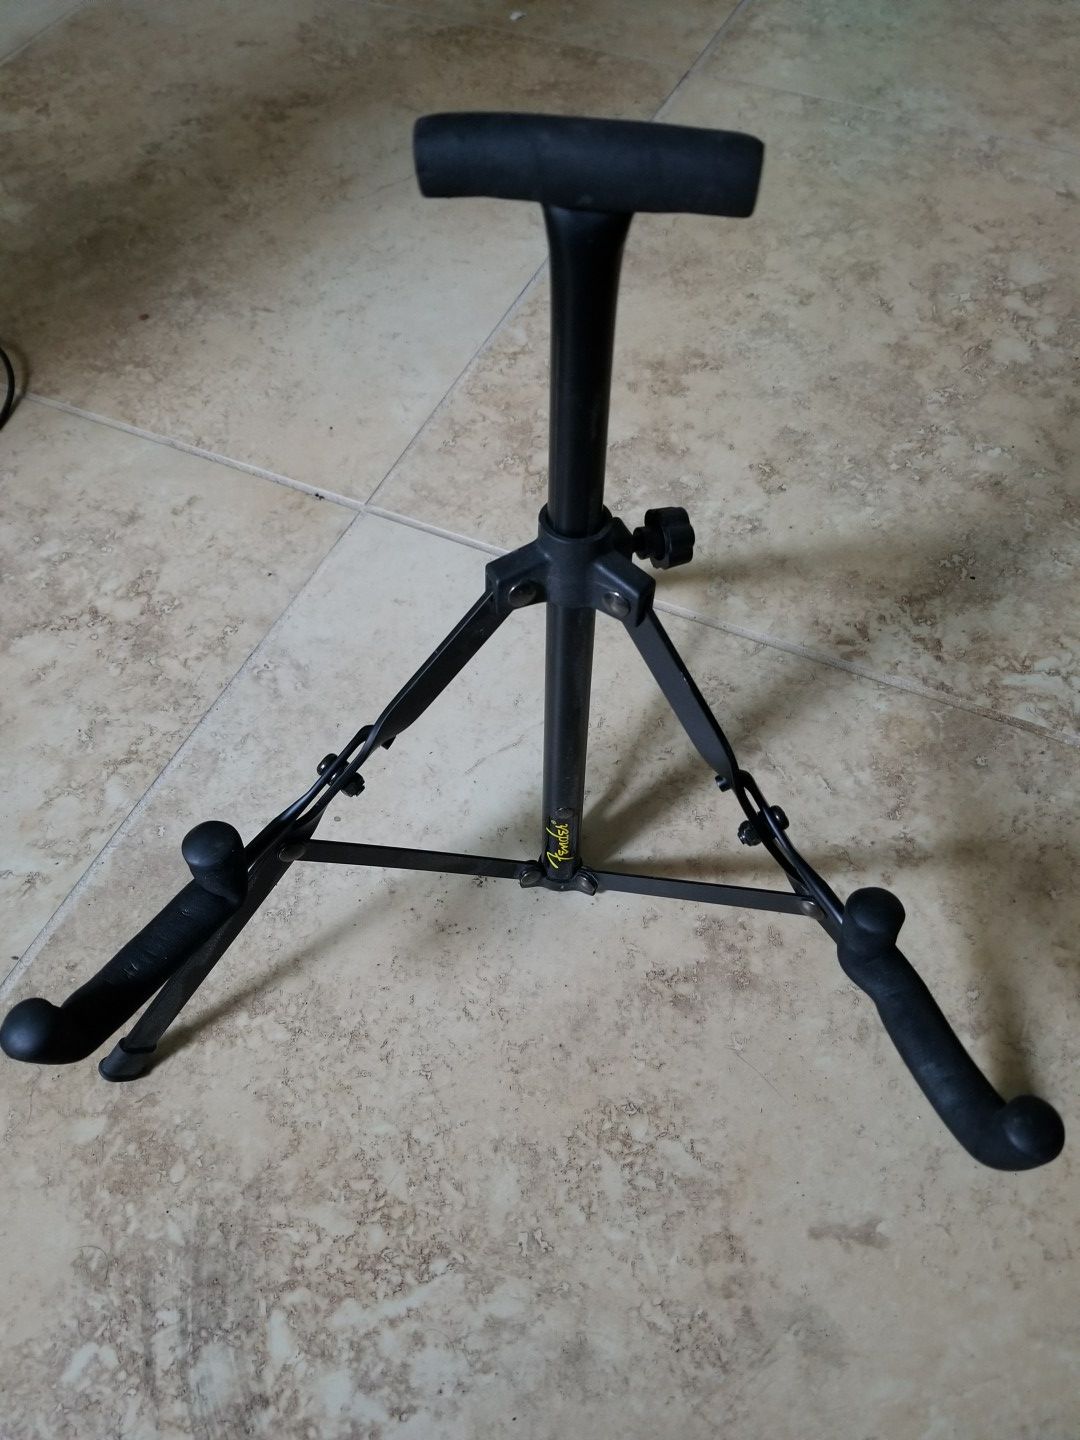 Fender mini guitar or bass stand